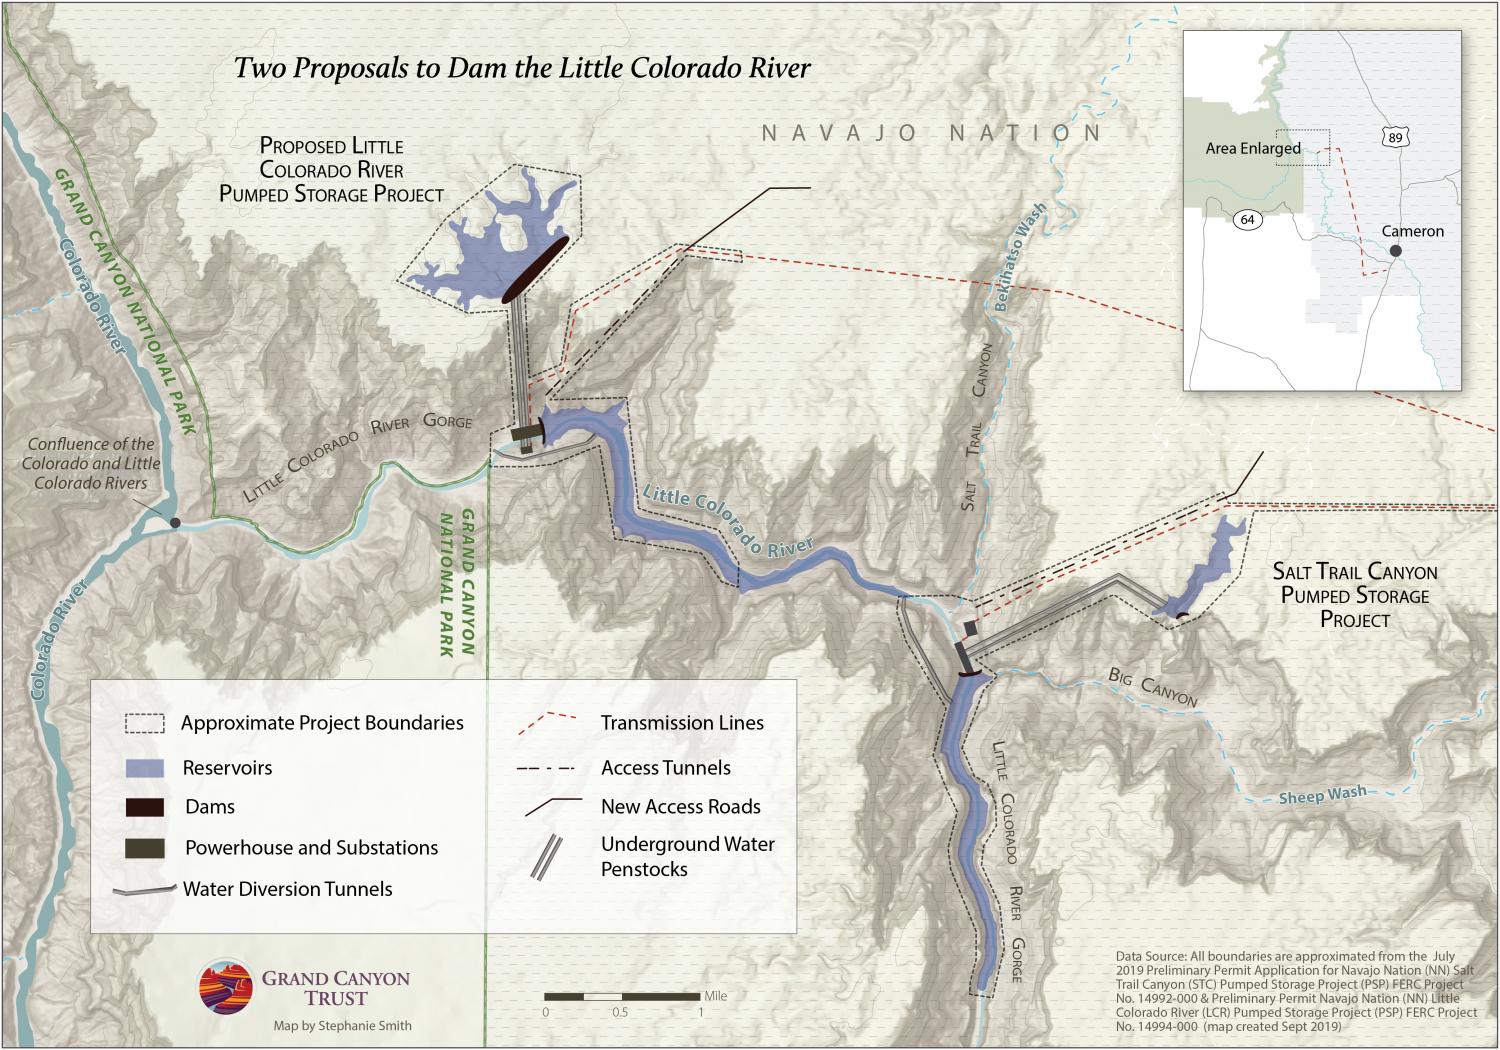 Map of two dams proposed on the Little Colorado River.